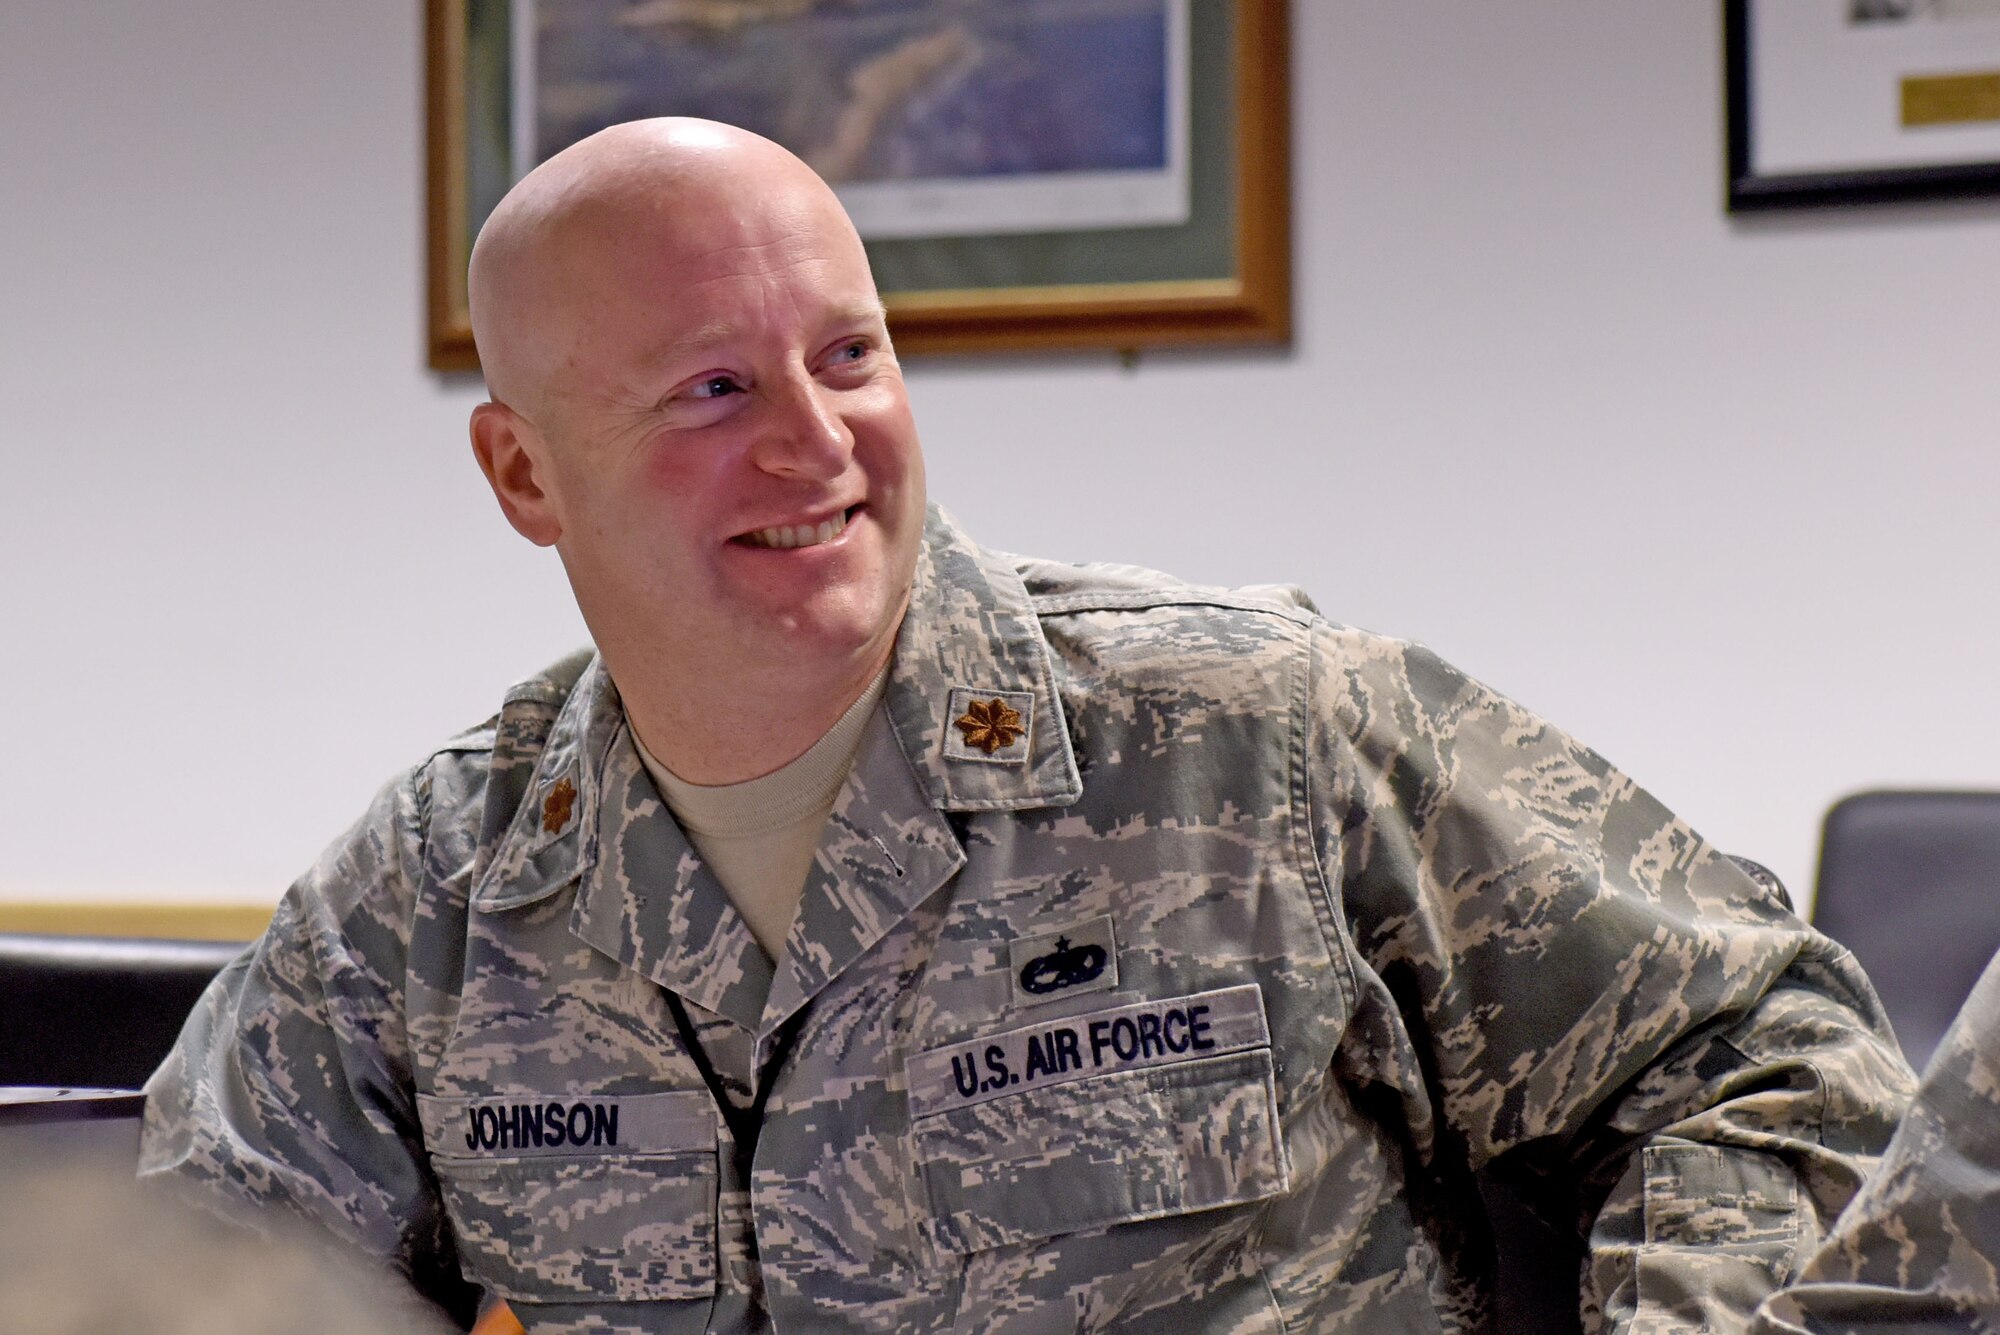 U.S. Air Force Maj. Phillip Johnson, 100th Aircraft Maintenance Squadron maintenance operations officer, smiles during an aircraft maintenance production meeting at RAF Mildenhall, England, Aug. 23, 2018. A member of the Tennessee Air National Guard, Johnson is fulfilling a 90 day deployment at RAF Mildenhall as part of Total Force Integration.  (US. Air Force photo by Senior Airman Lexie West)